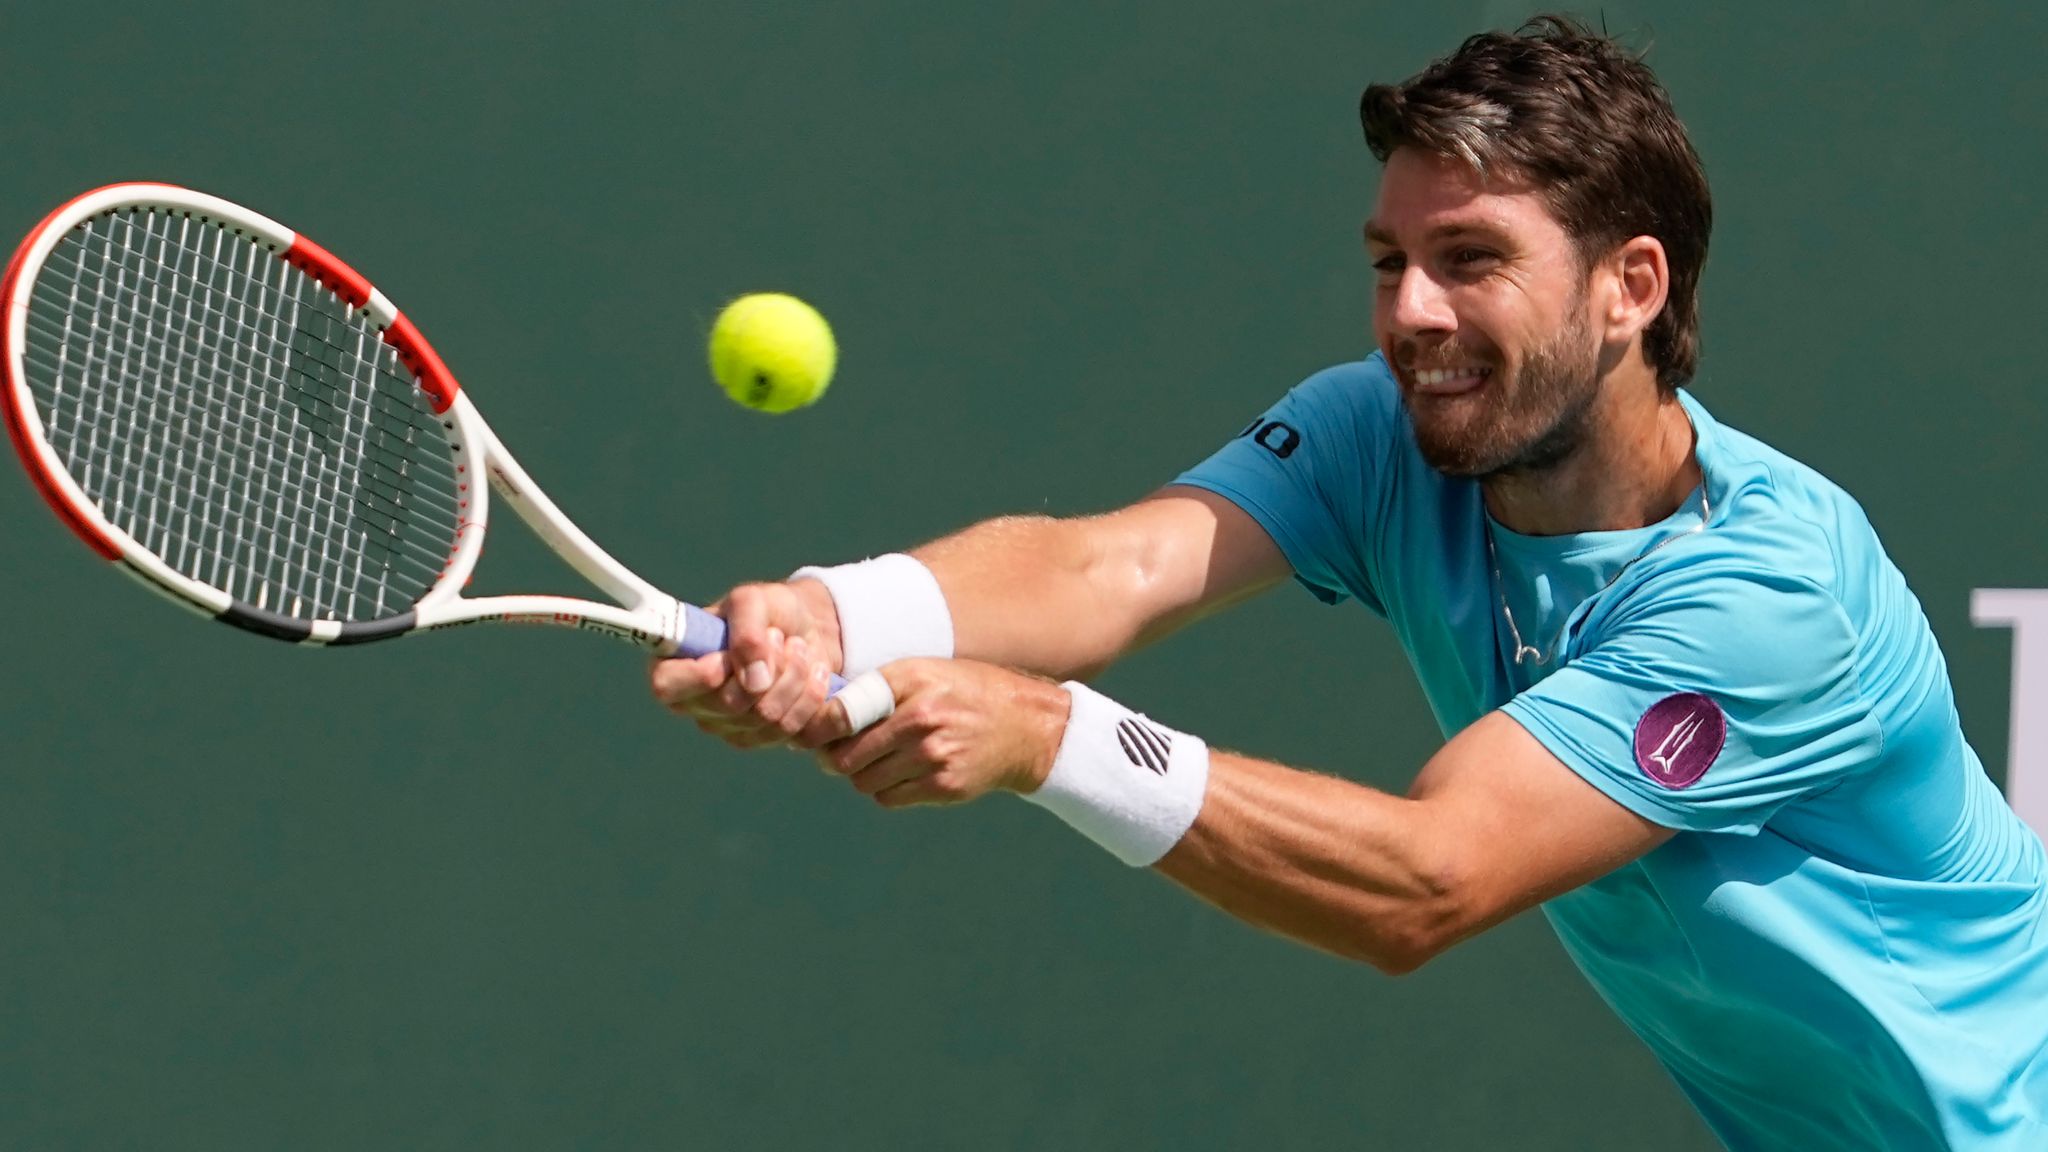 Cameron Norrie Briton loses Indian Wells quarter-final to Frances Tiafoe Tennis News Sky Sports